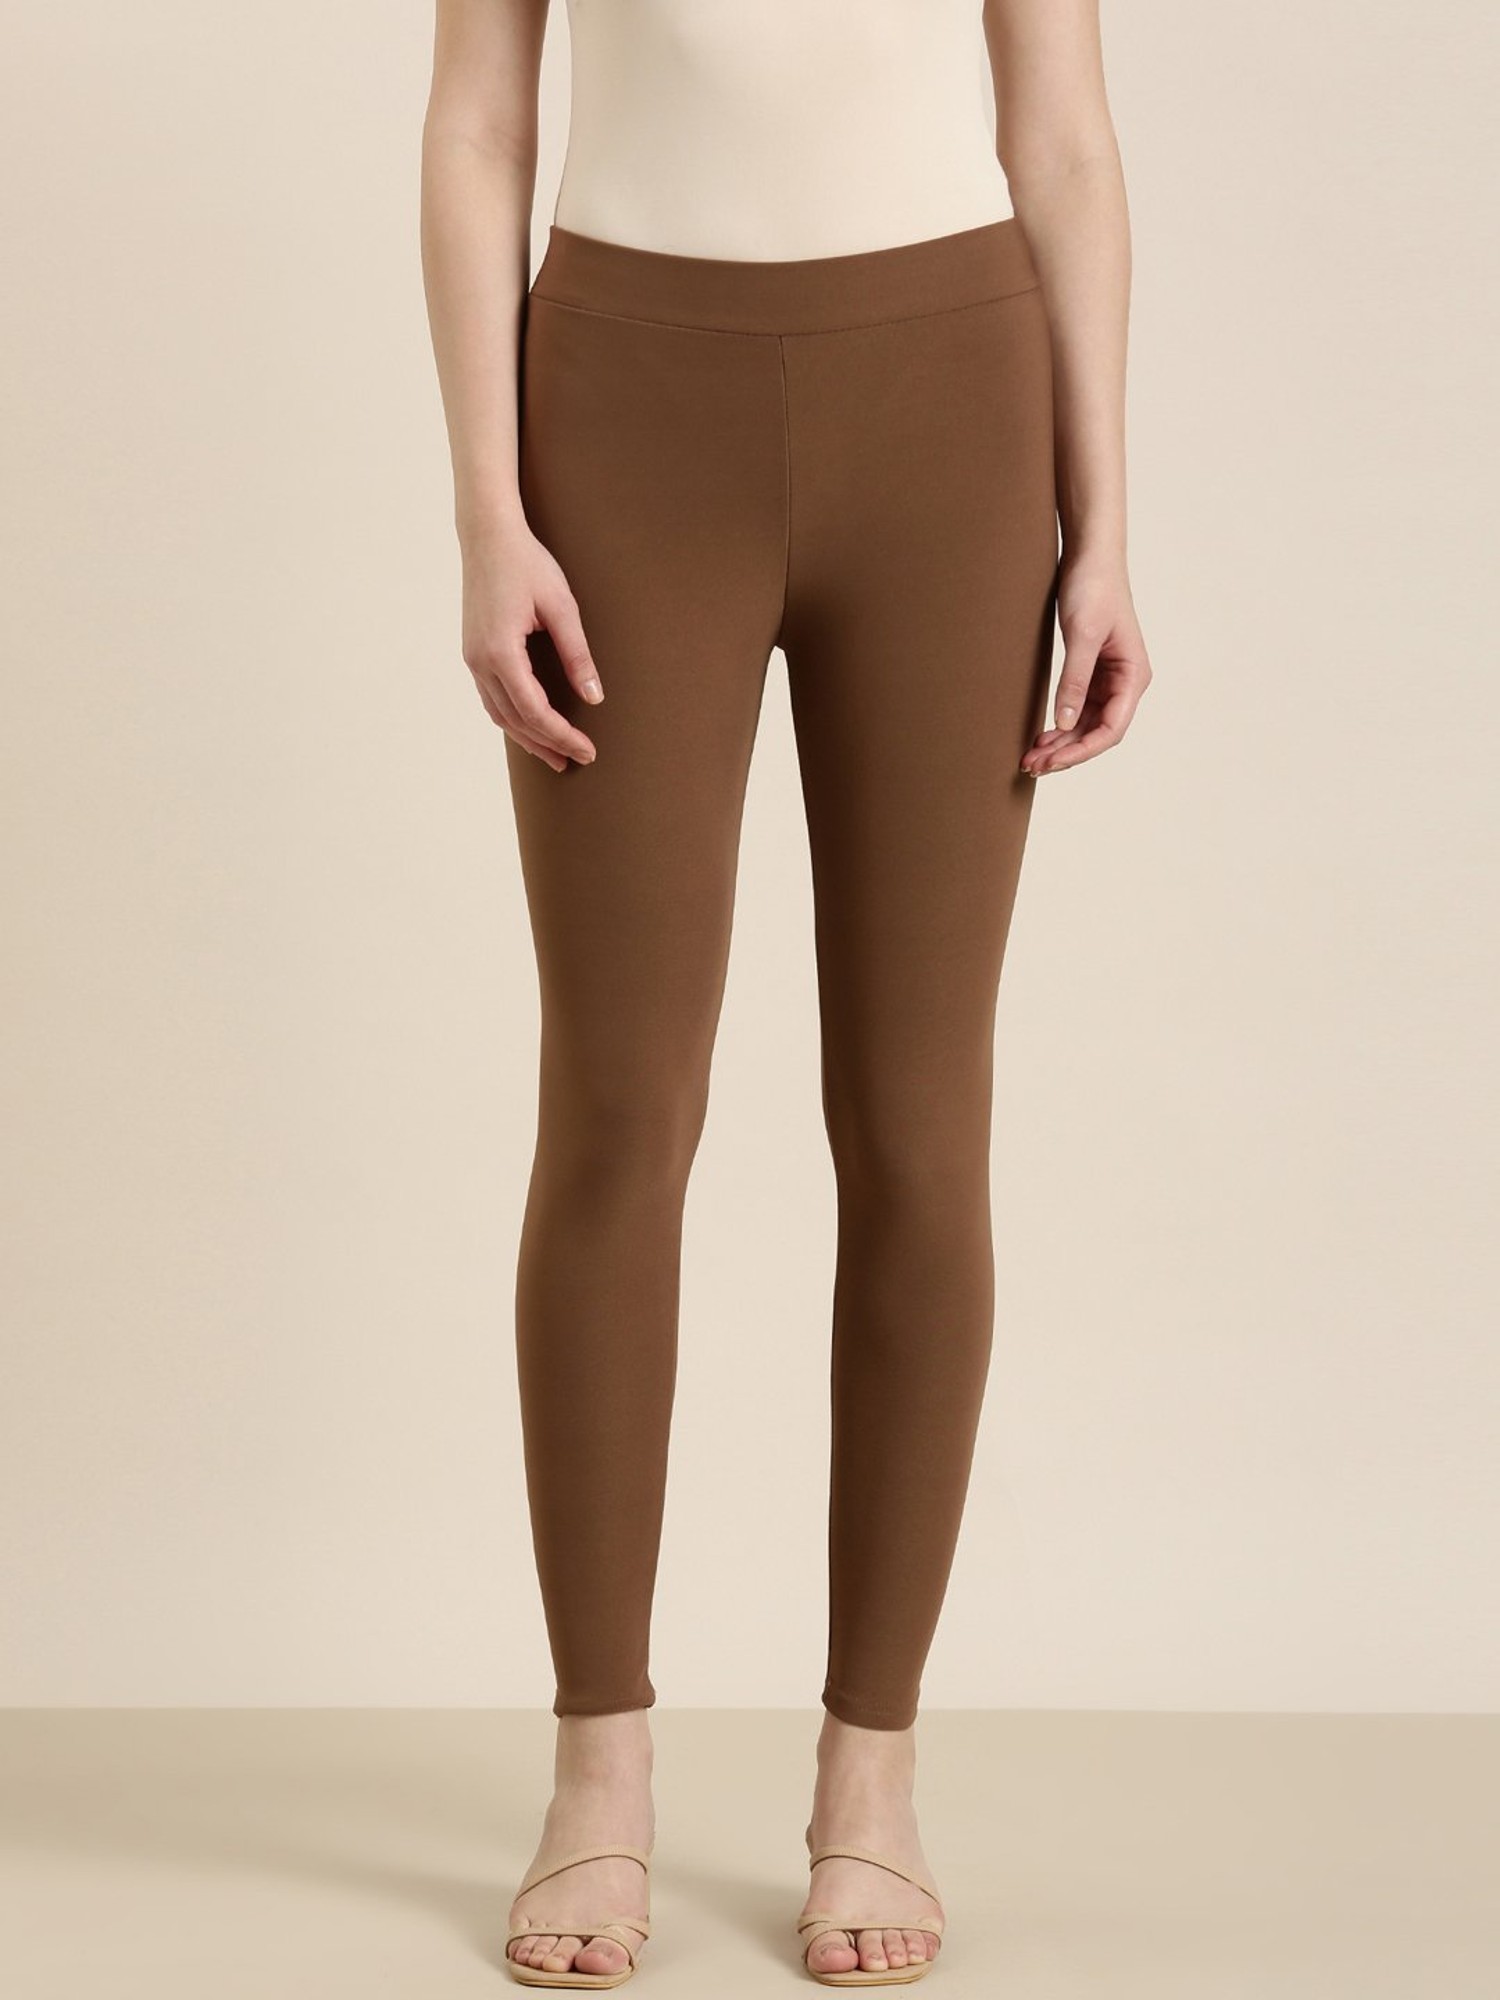 Buy C9 Cotton Track pants  Brown at Rs1551 online  Activewear online